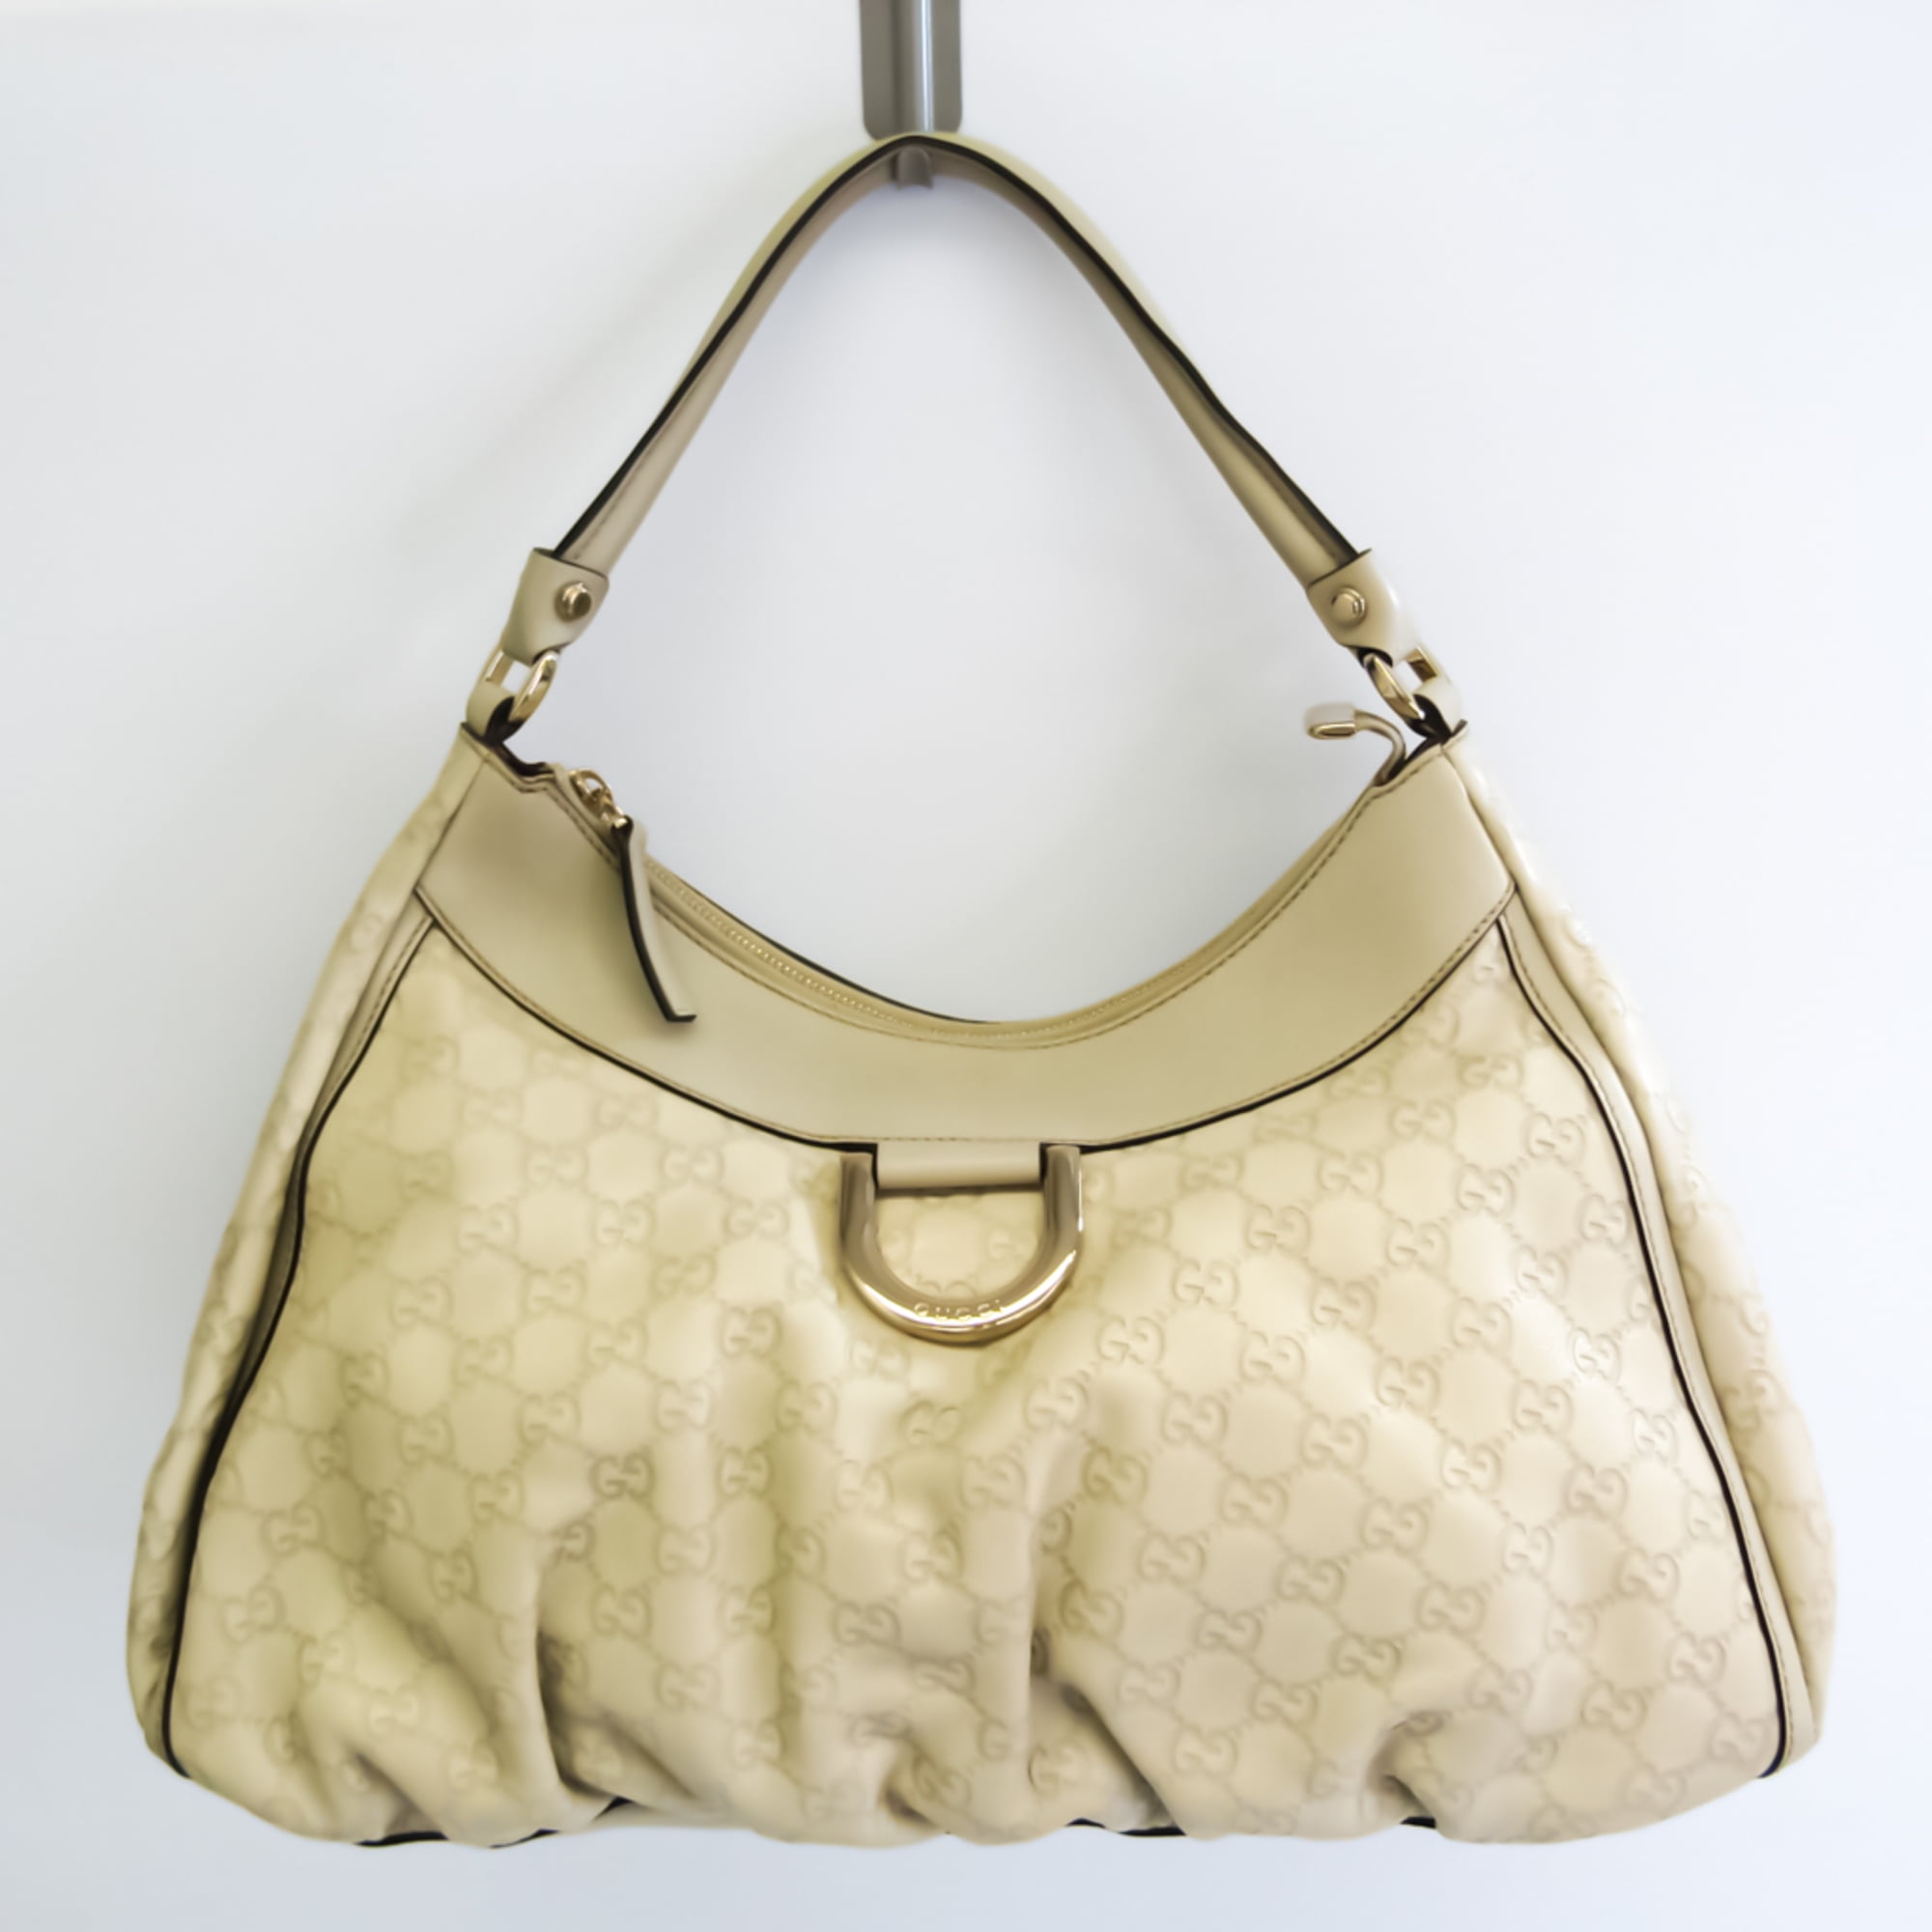 Gucci Leather Exterior Bags & Handbags for Women, Authenticity Guaranteed